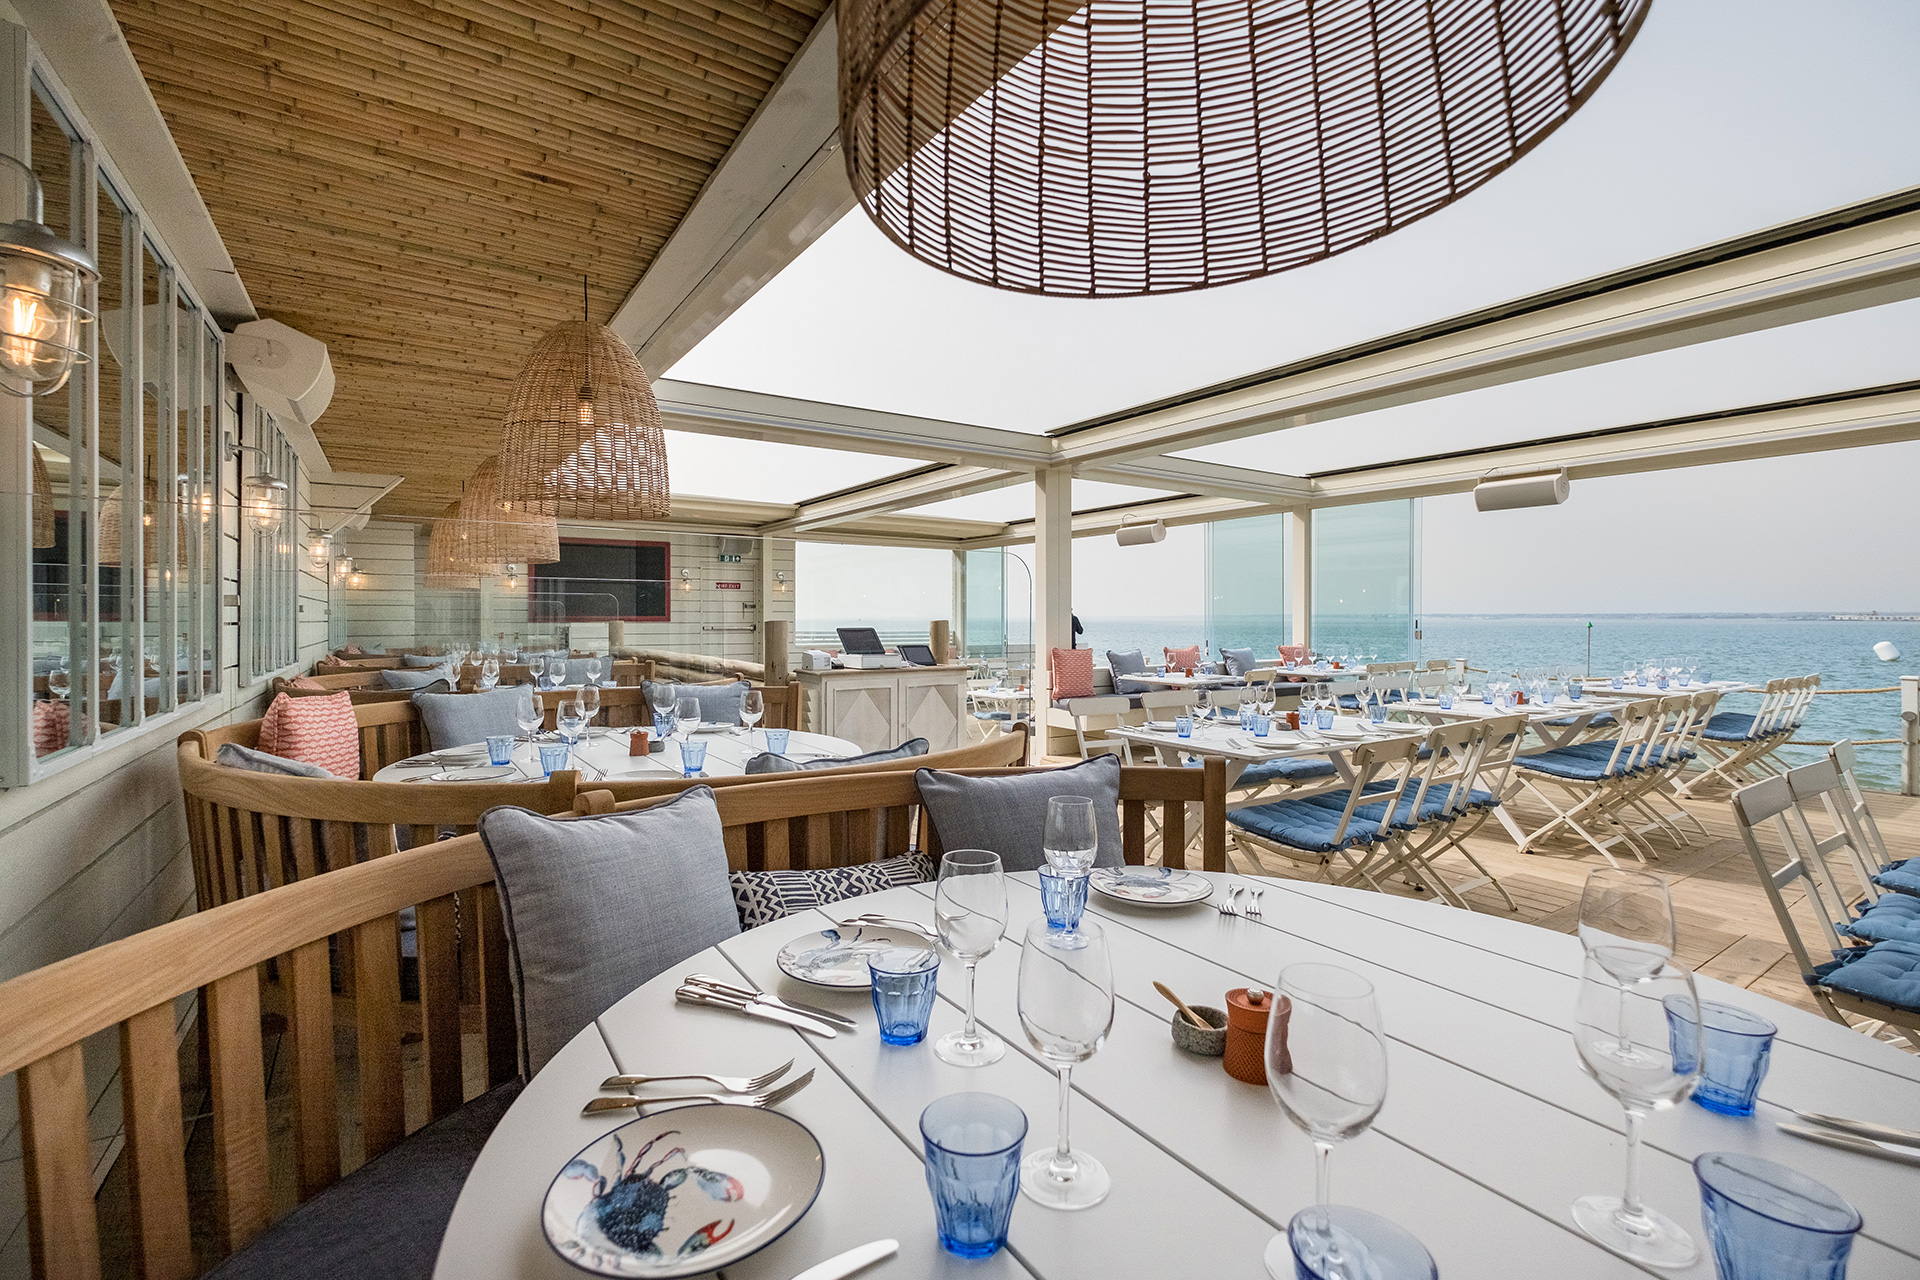 Restaurant Review: The Hut, Colwell Bay, Isle of Wight